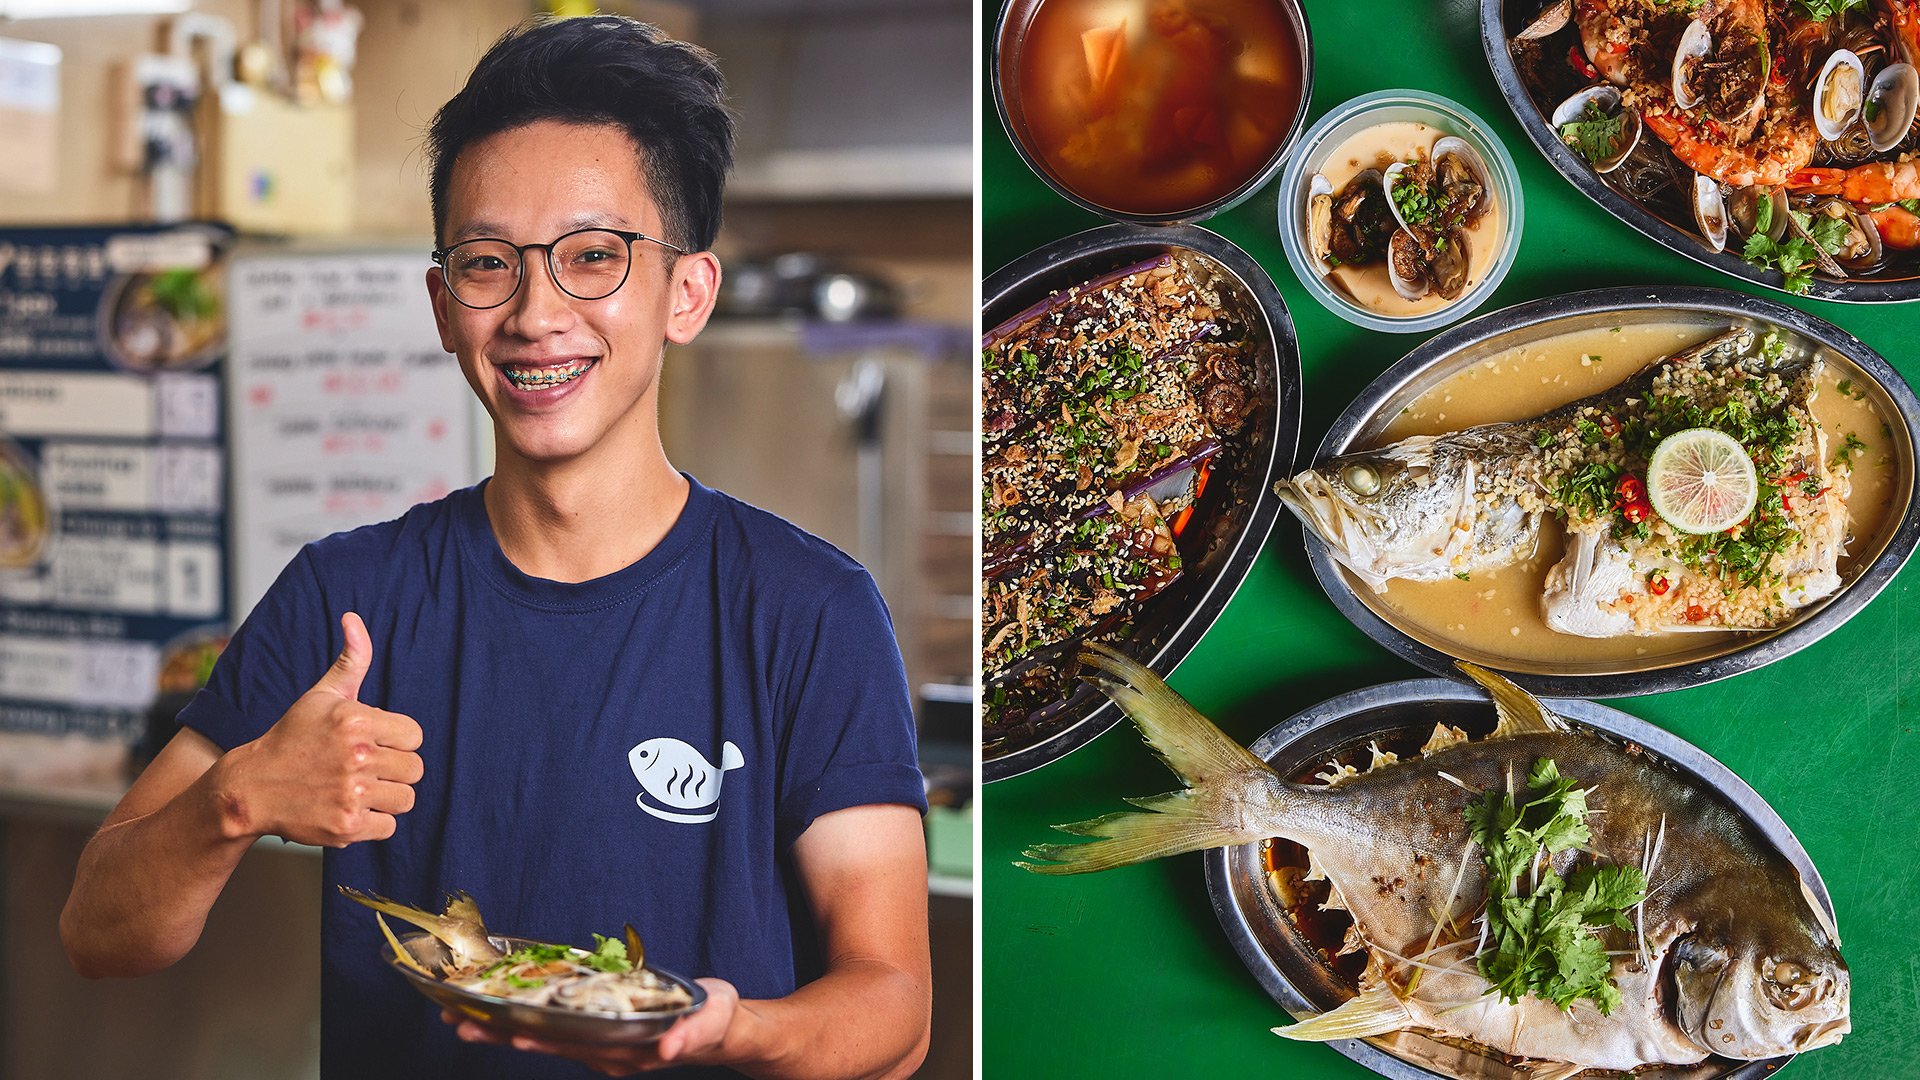 Skilled Chef $8.50 Malay Food Hawker Business